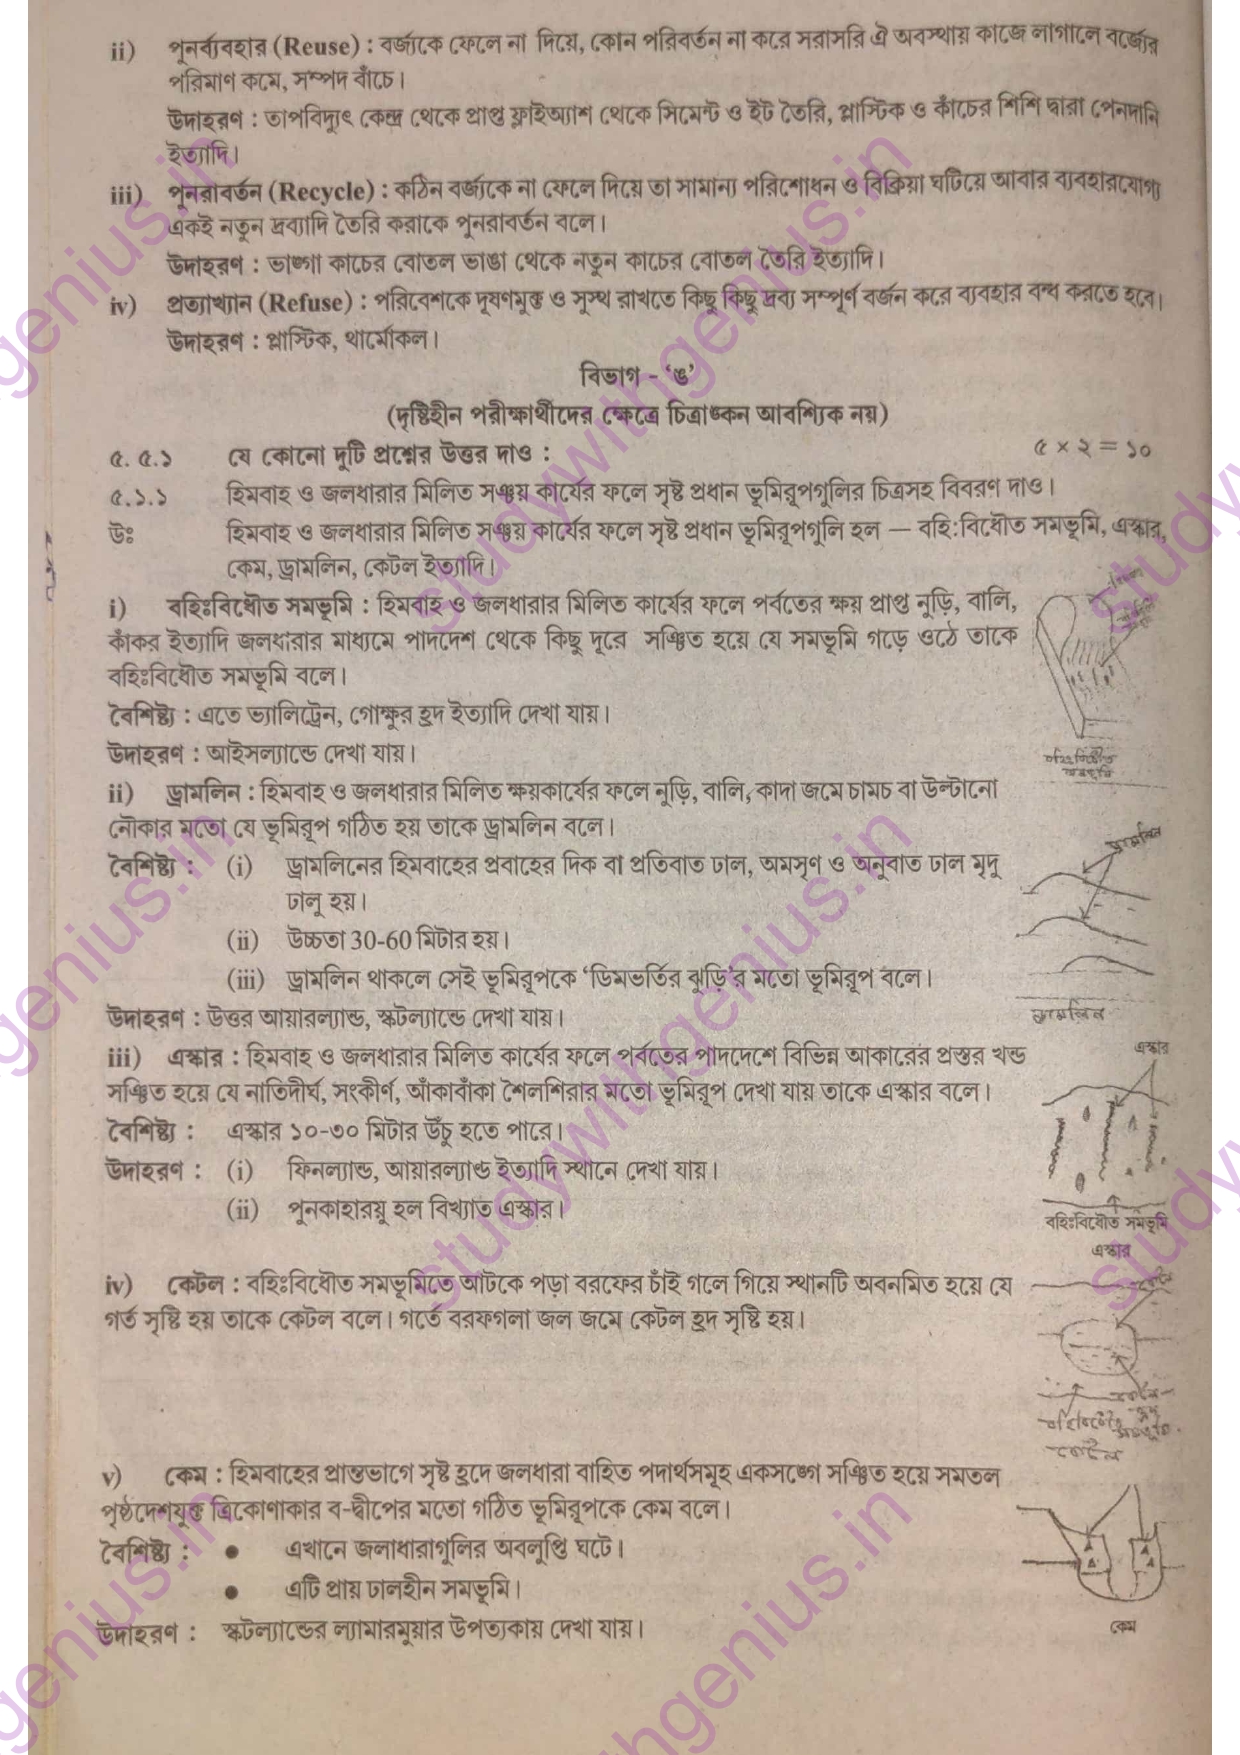 WBBSE Madhyamika Geography Subject Question Papers Bengali Medium 2018